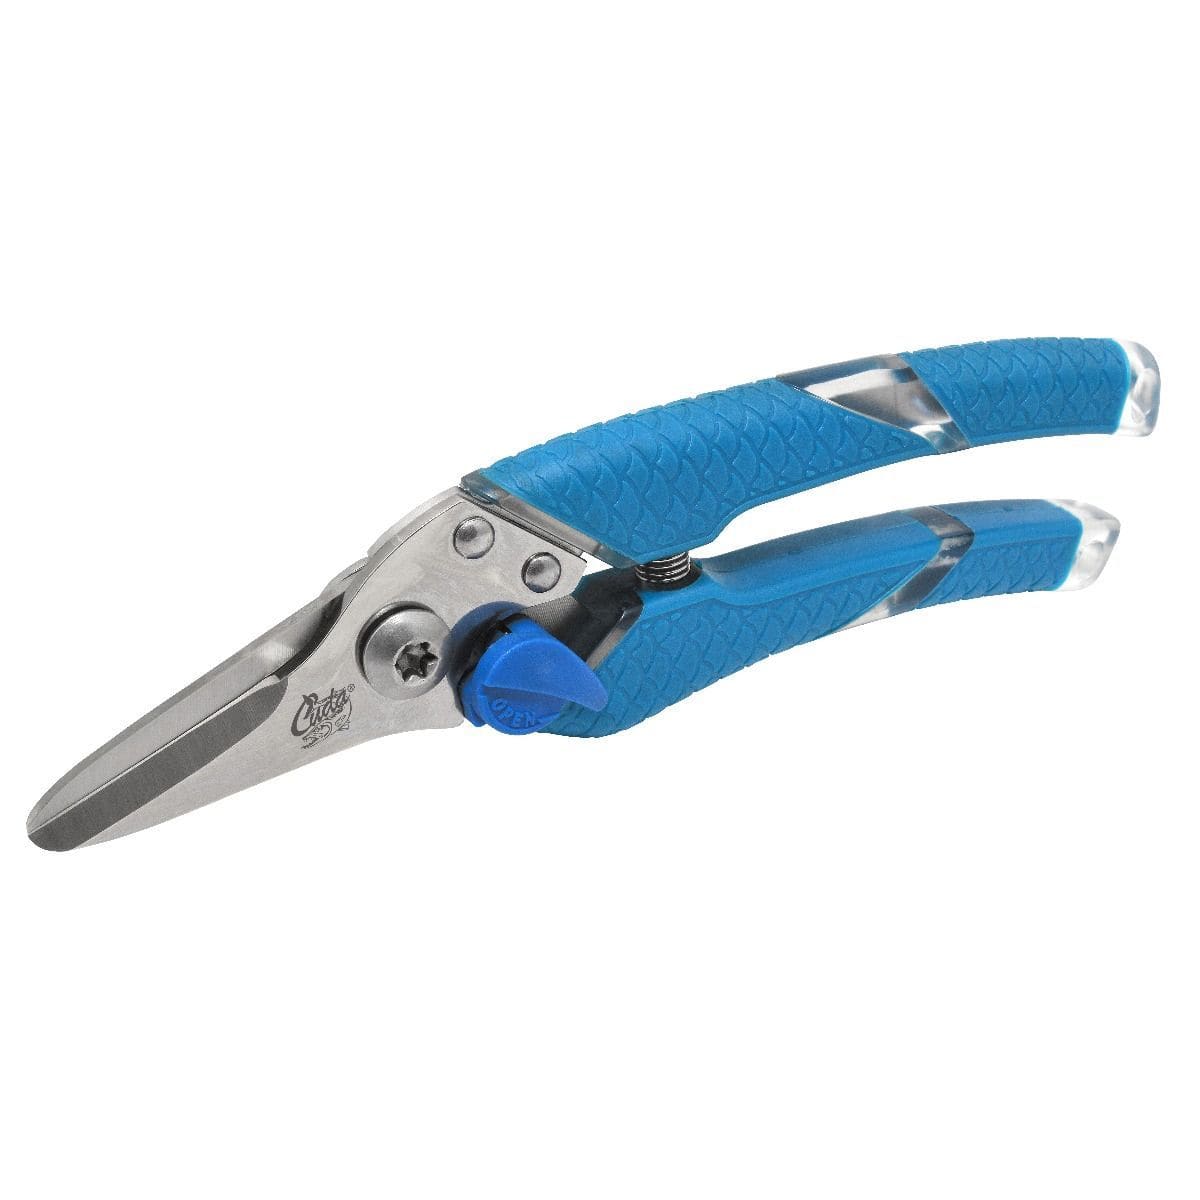 Plaztek Cuda 7.5" leader cutters are 3x stronger the standard steel. Blue fish scales handles are comfortable when in use.